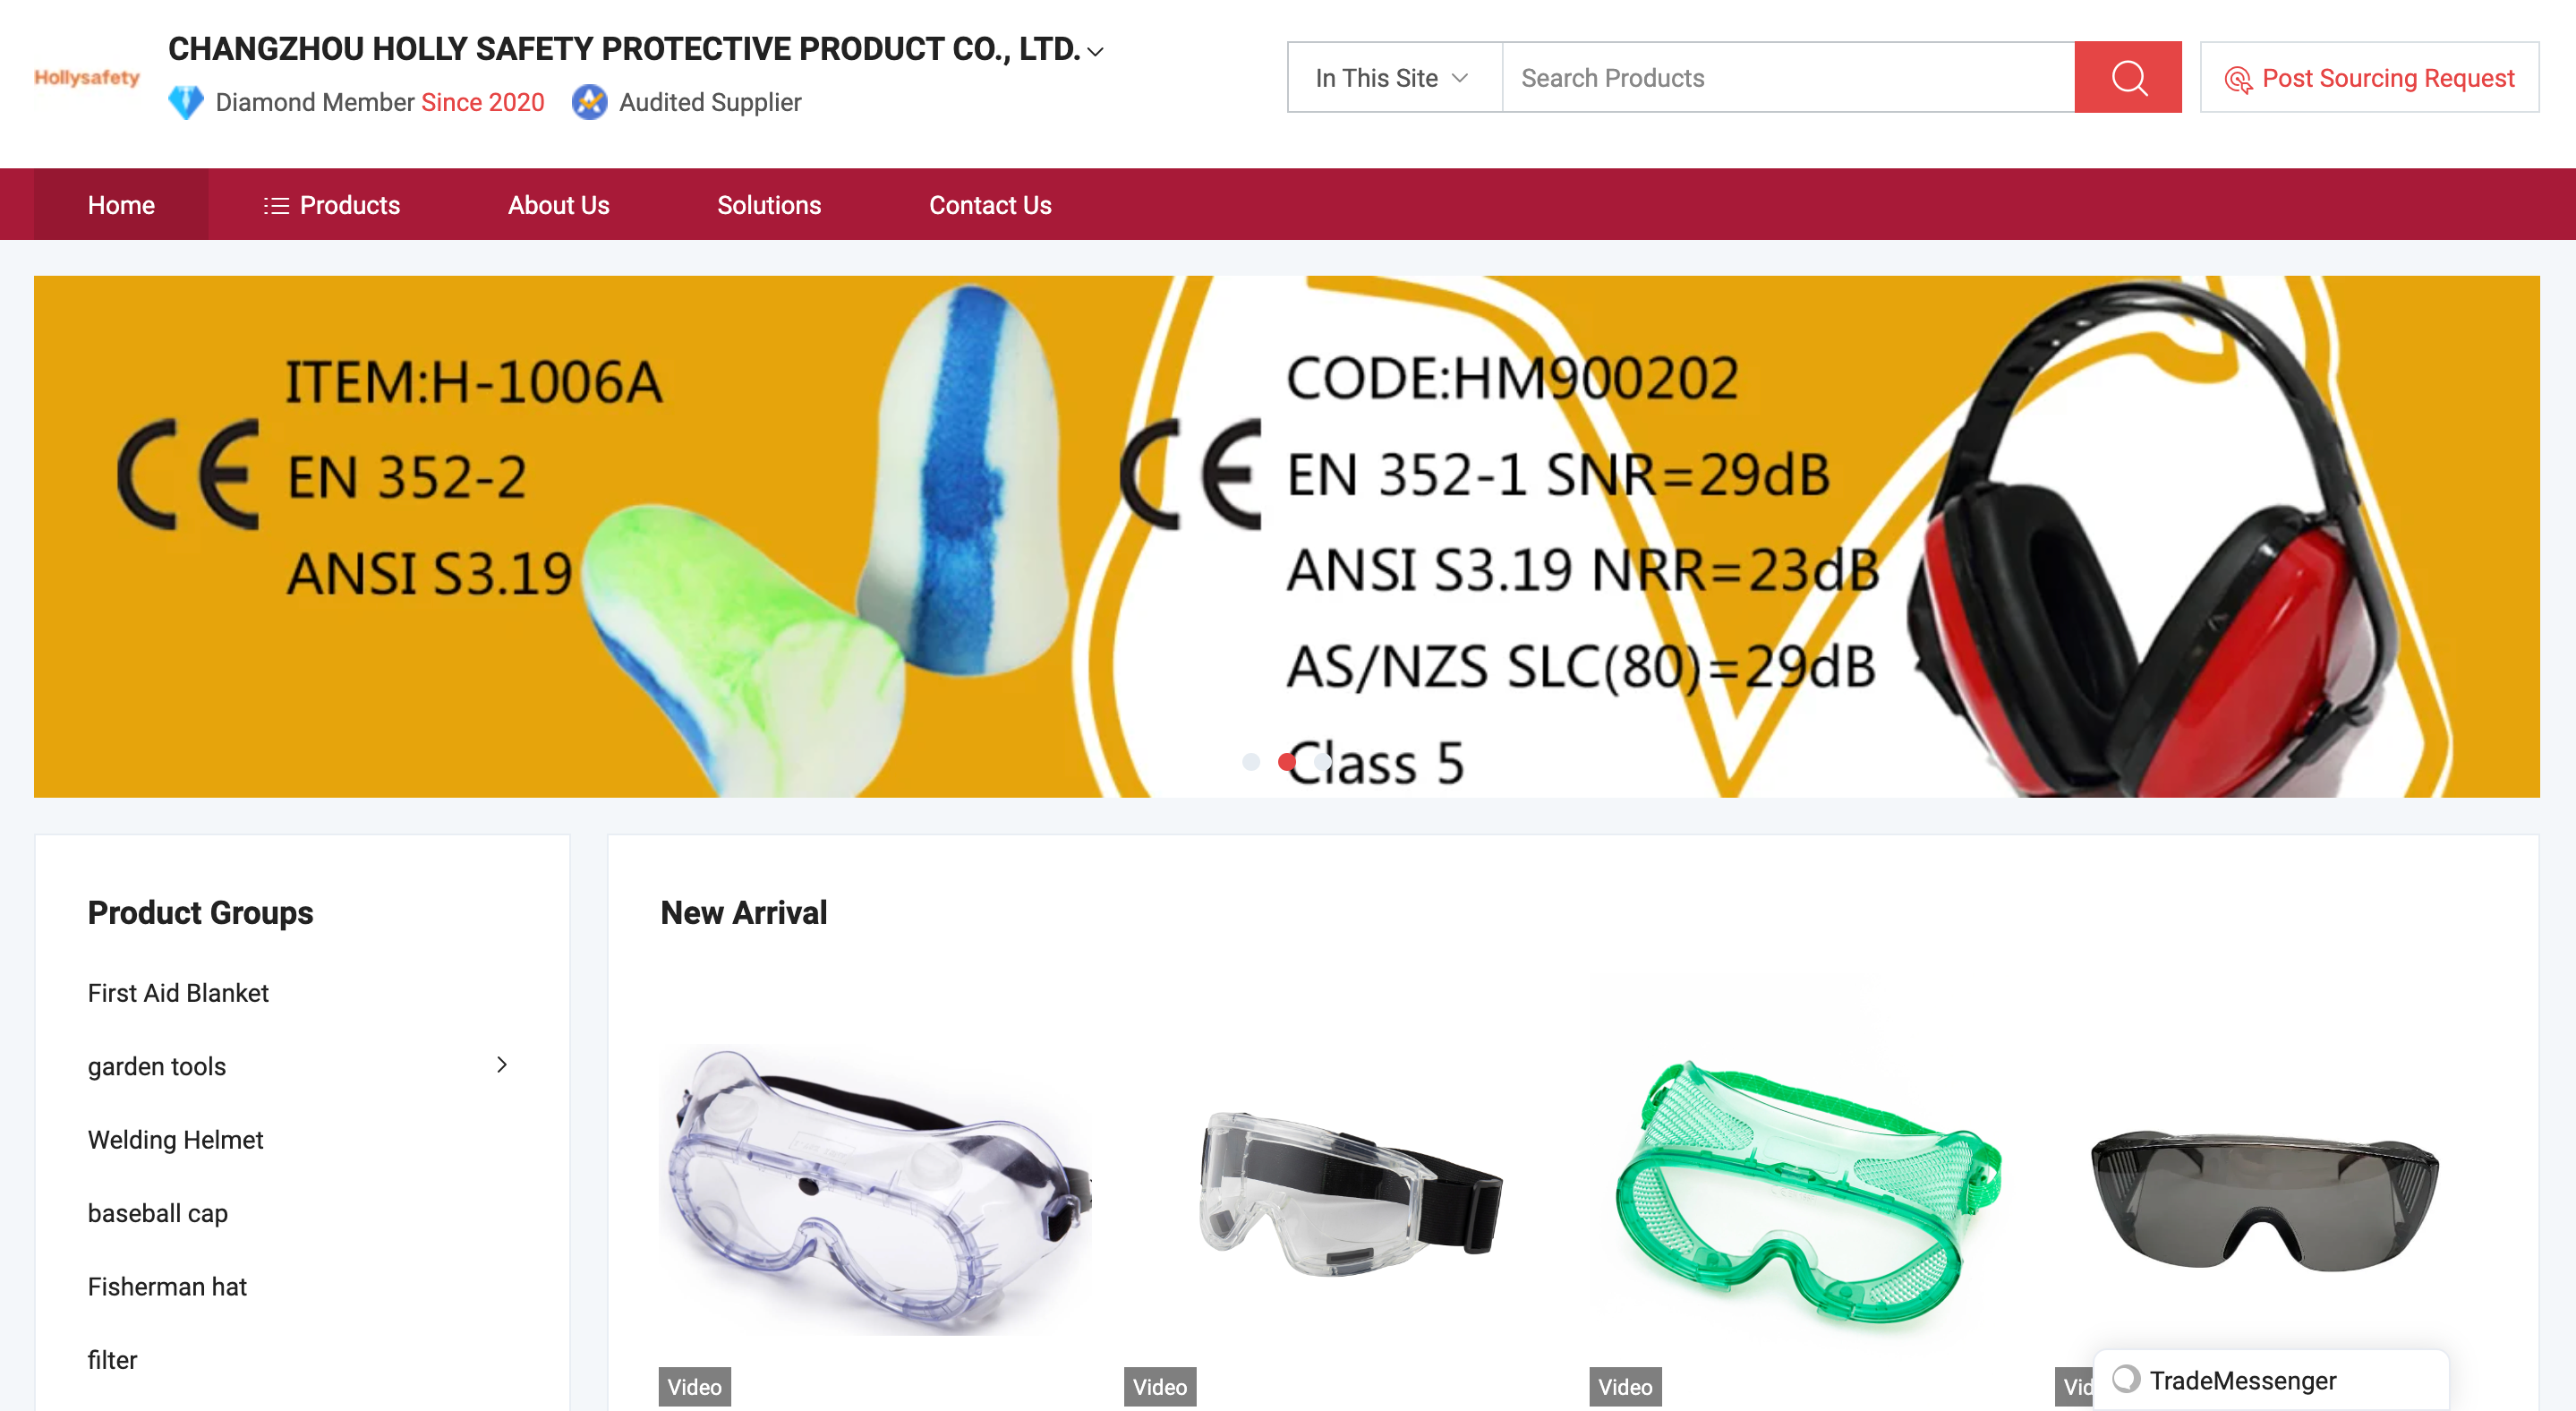 Changzhou Holly Safety Protective Product Co., Ltd